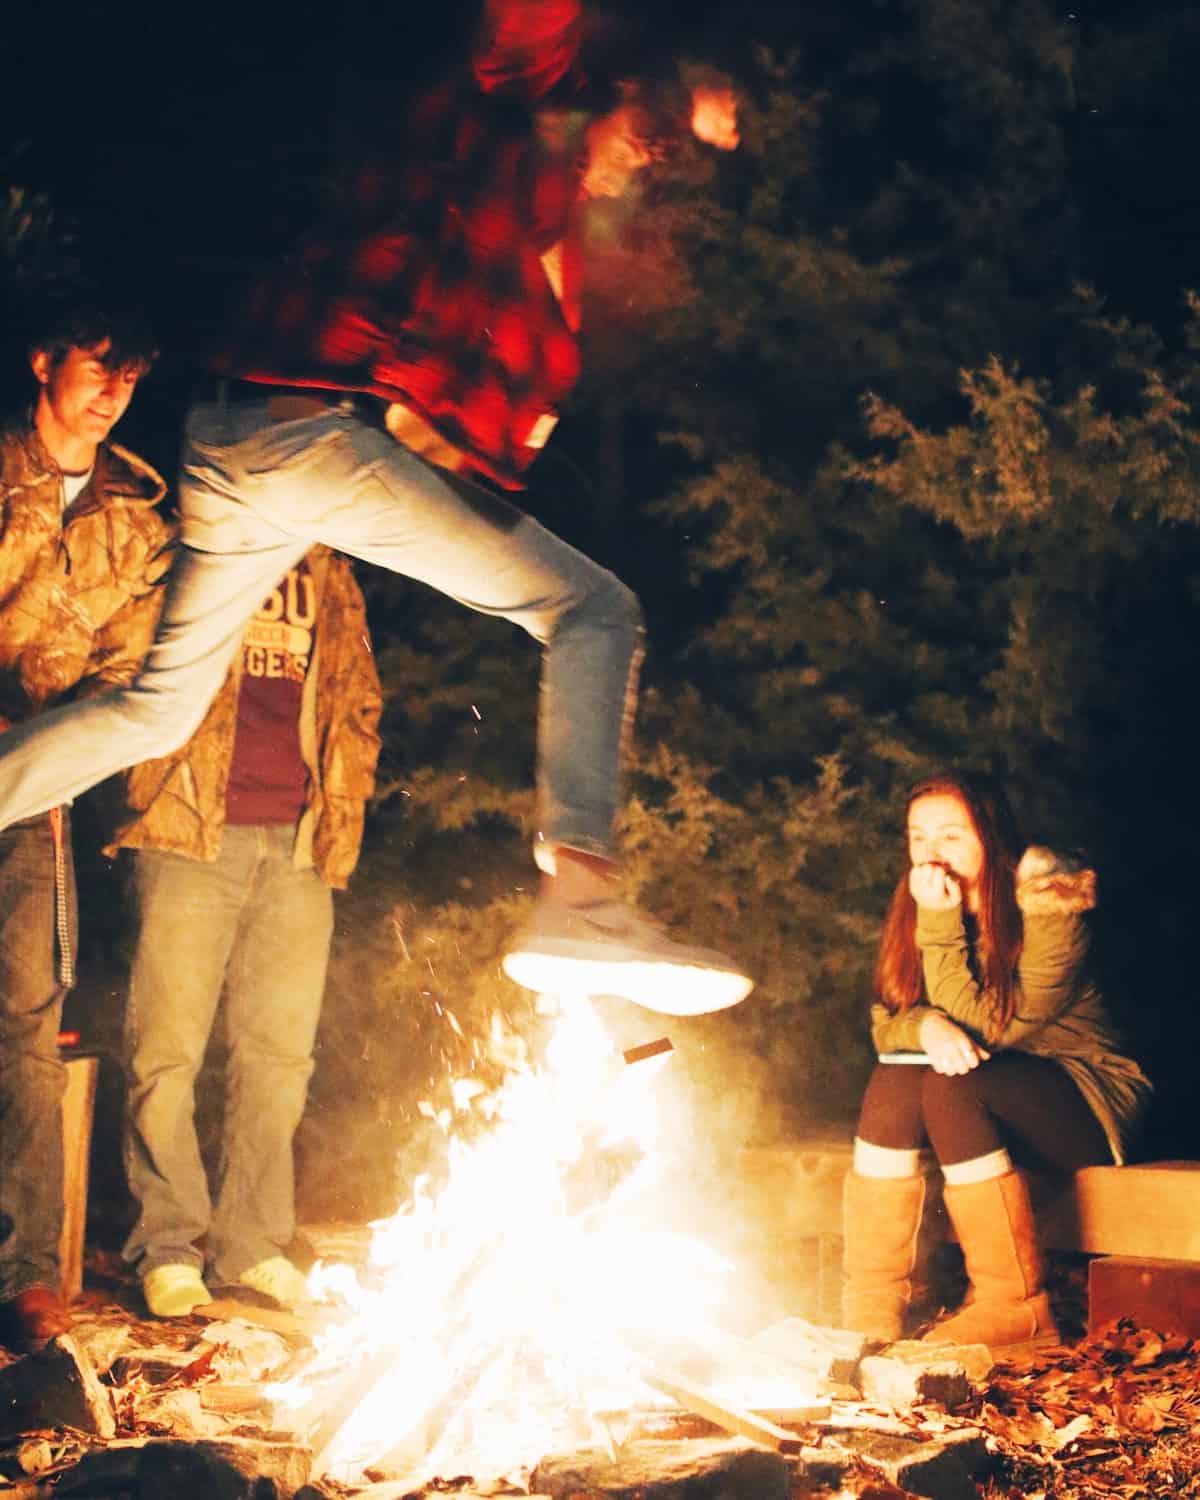 A man in a plaid shirt leaping over a bonfire while others look on